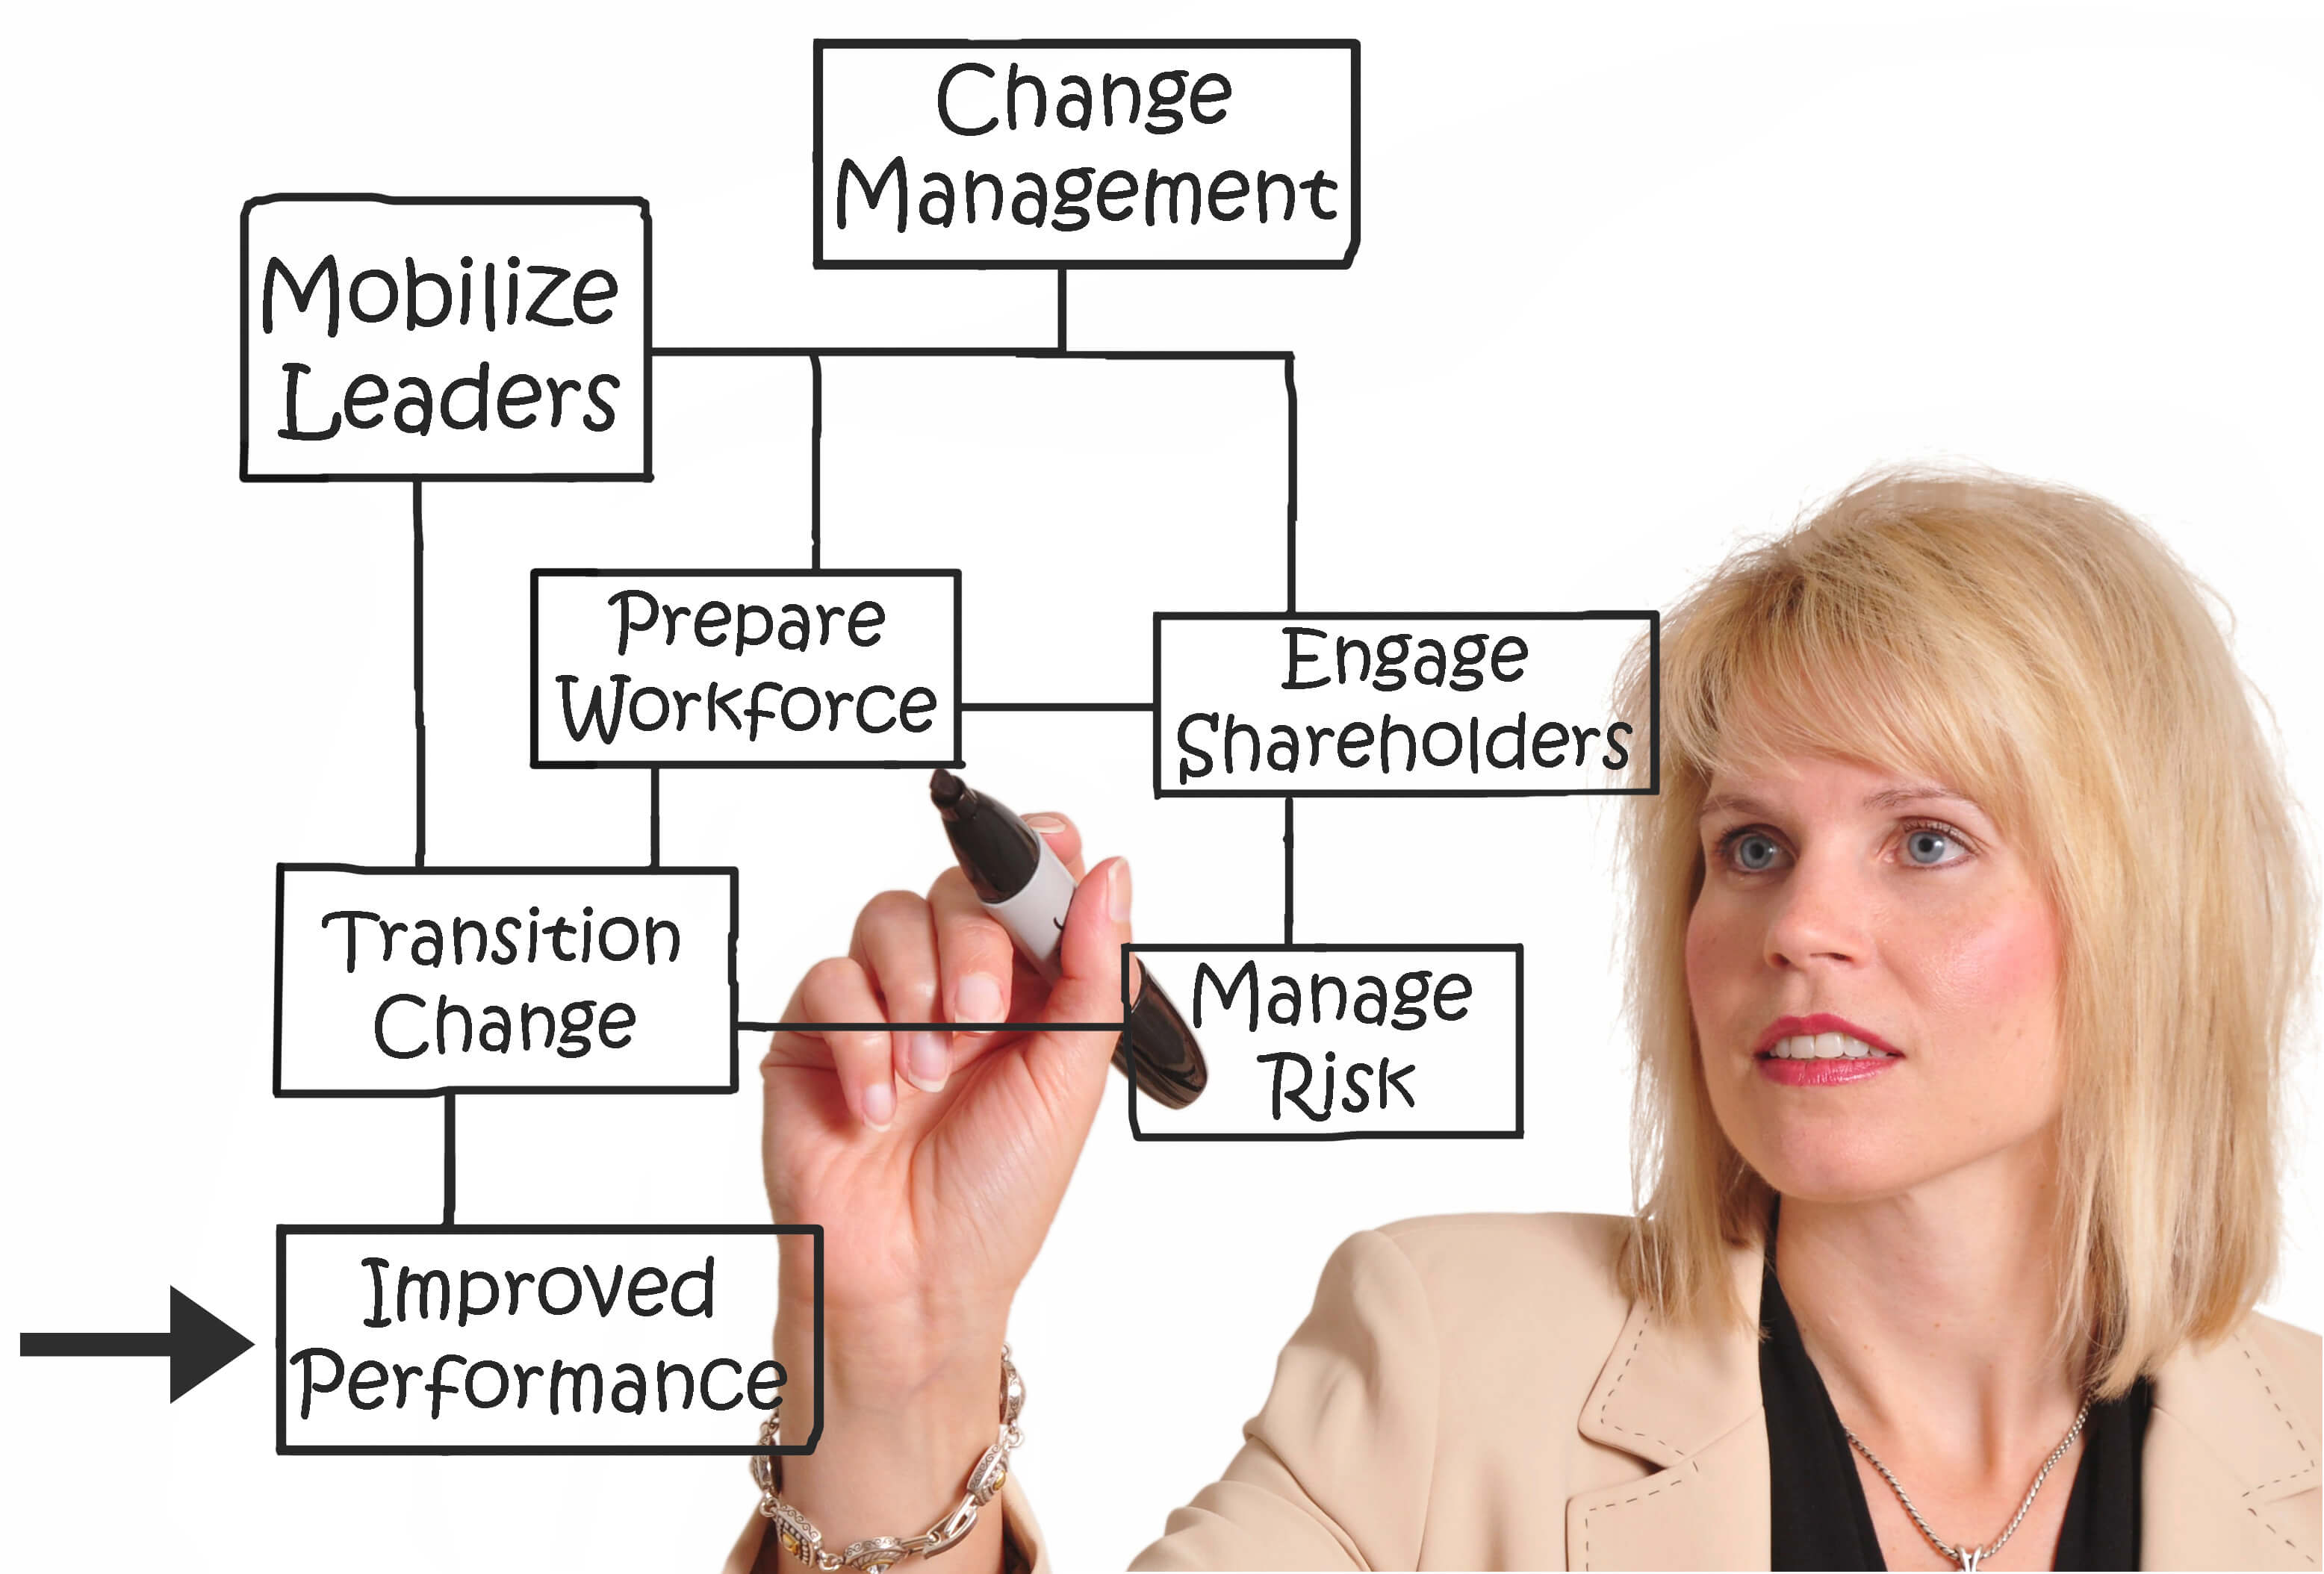 Change Management Course From Spearhead Trainingspearhead Training